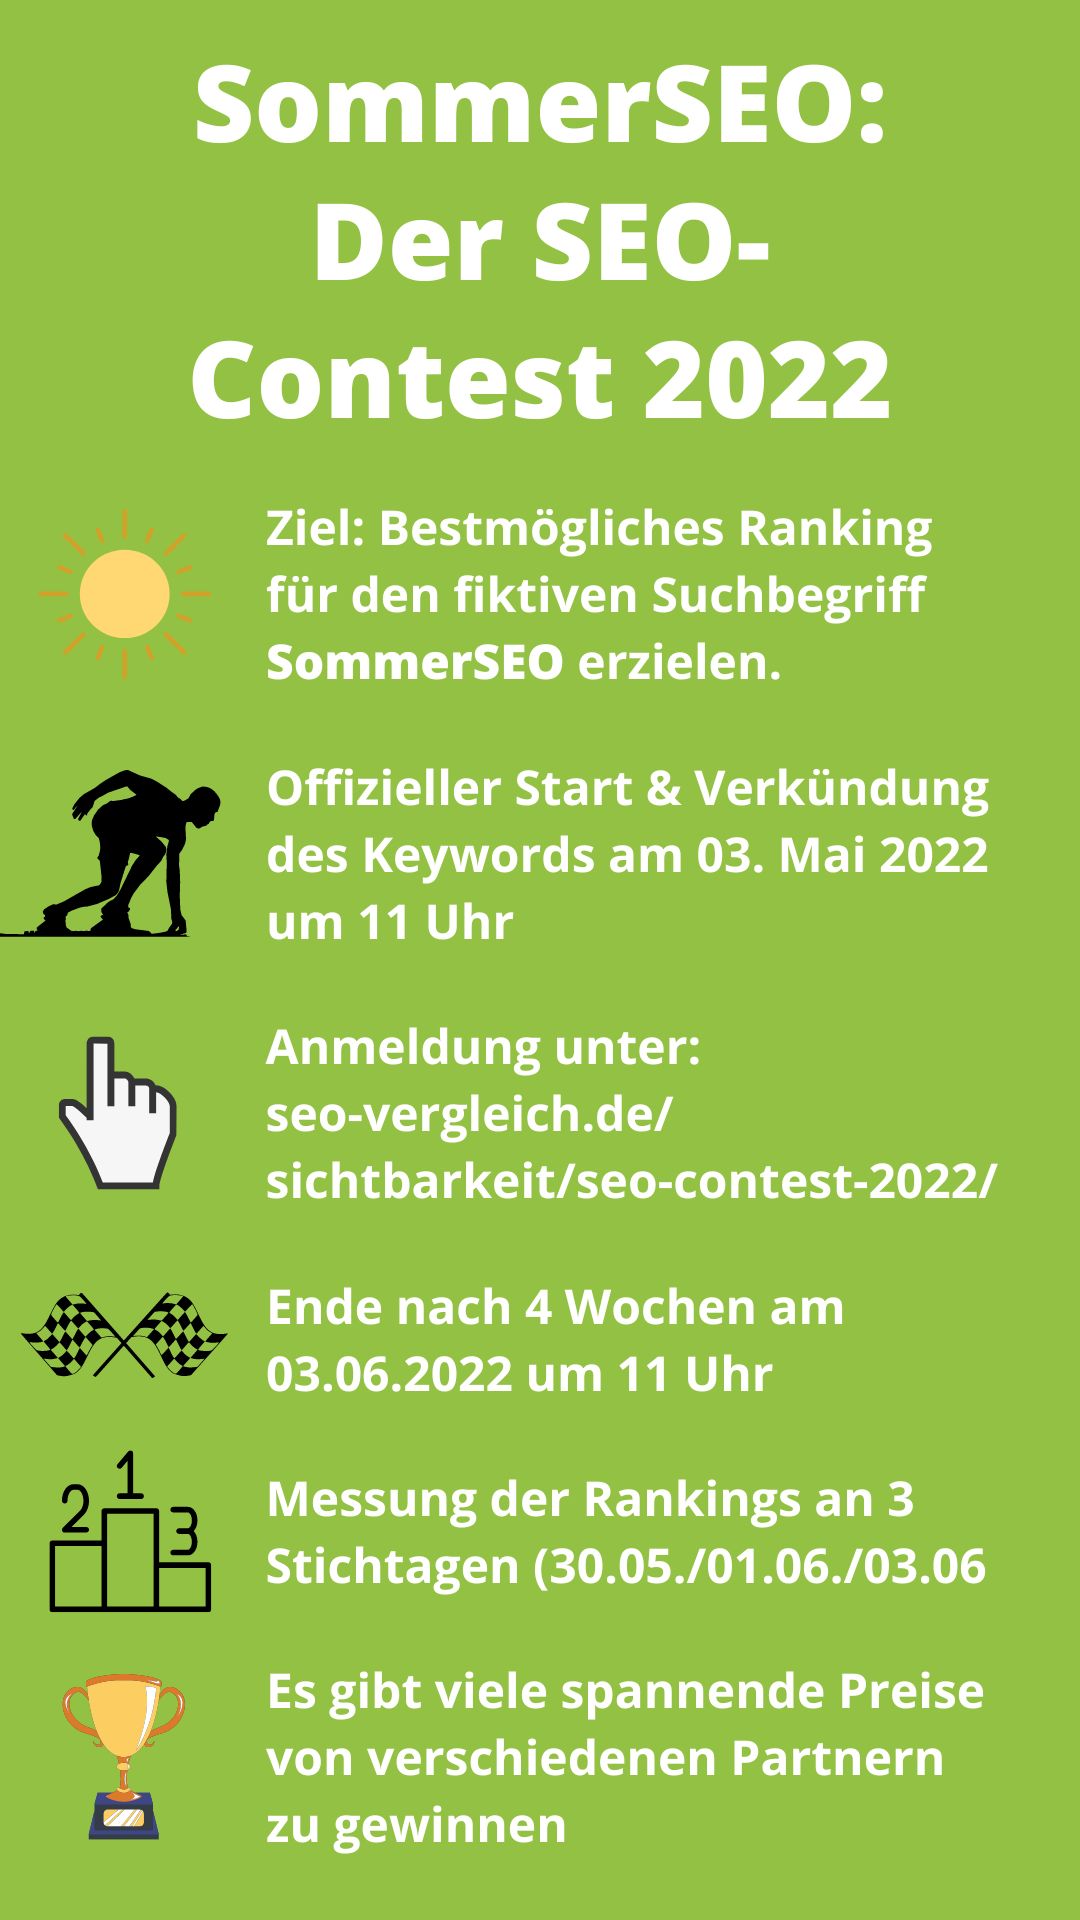 SommerSEO: Der SEO Contest 2022